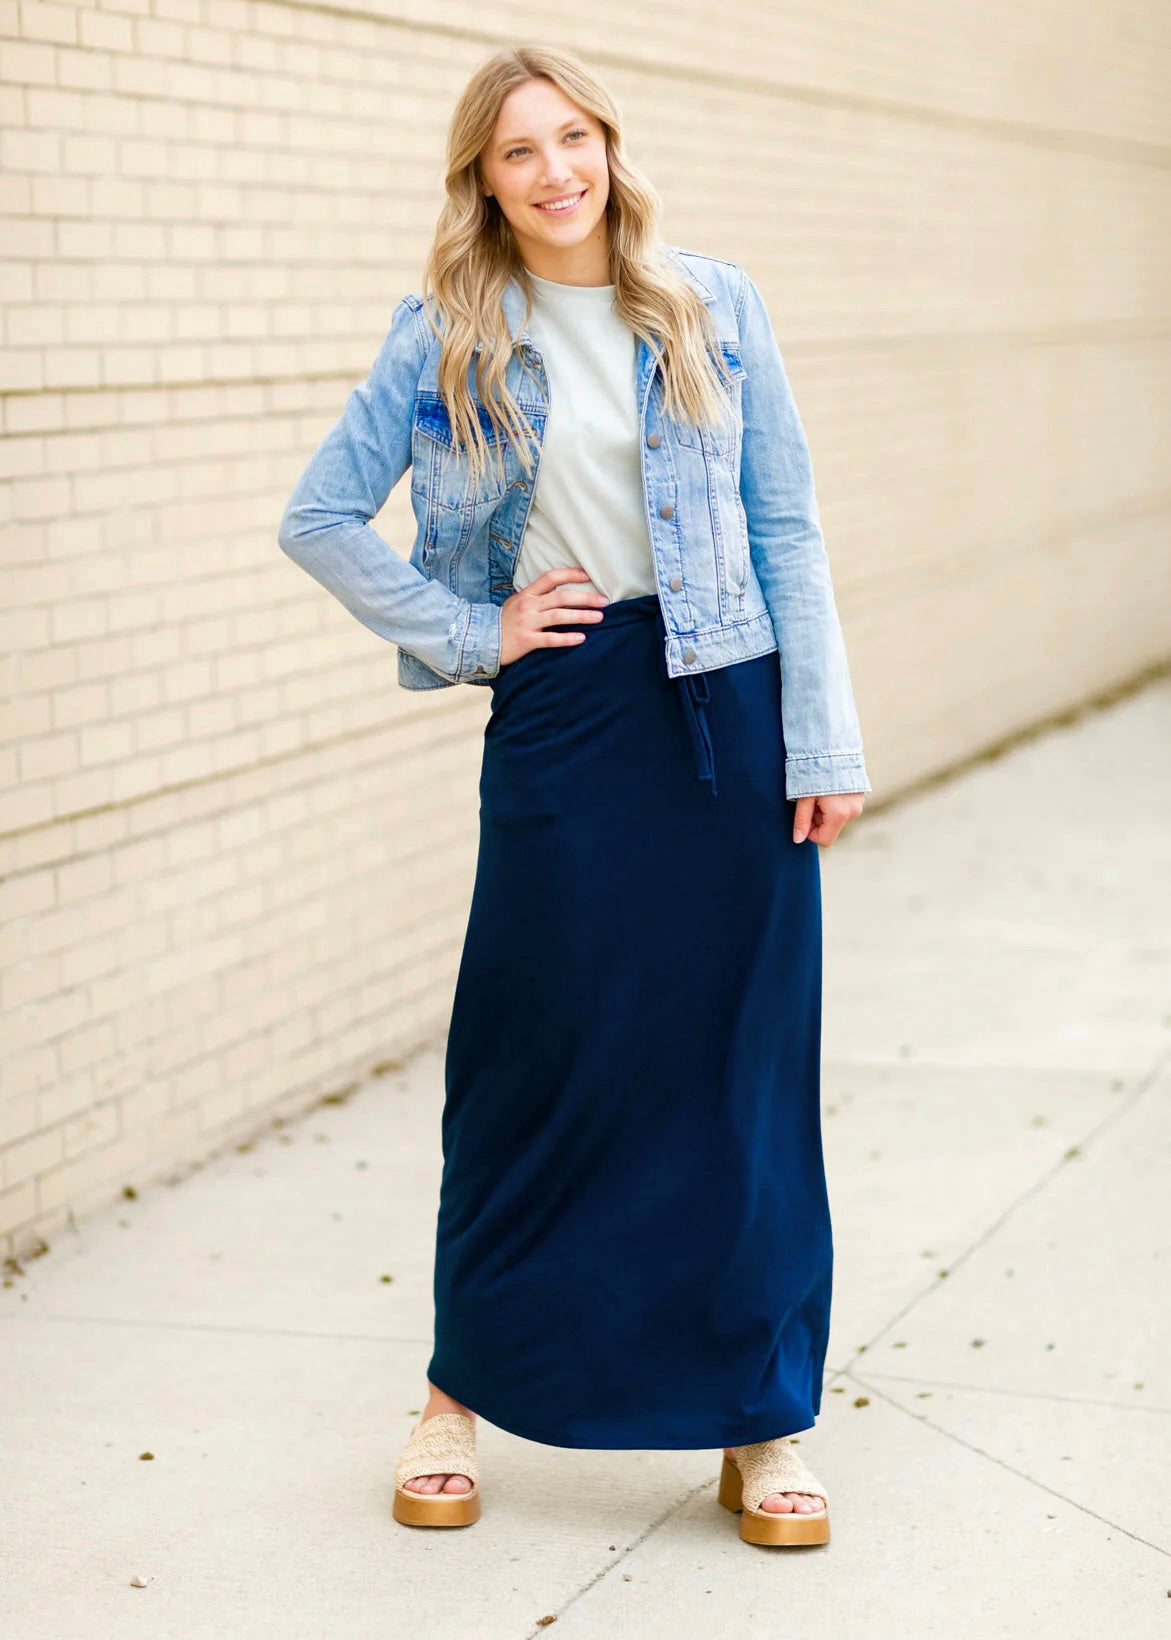 A young blonde woman with her hand on her hip smiling and wearing a denim jacket and navy blue Maxi Skirt with Pockets featuring a Soft & Stretchy Premium Fabric Blend, Adjustable Drawstring Tie Waist, and Pockets. Available in sizes S-3XL in both solid Black or Navy Blue. Discover our Best Selling All-year All-season Maxi Skirt for every body shape & size. 